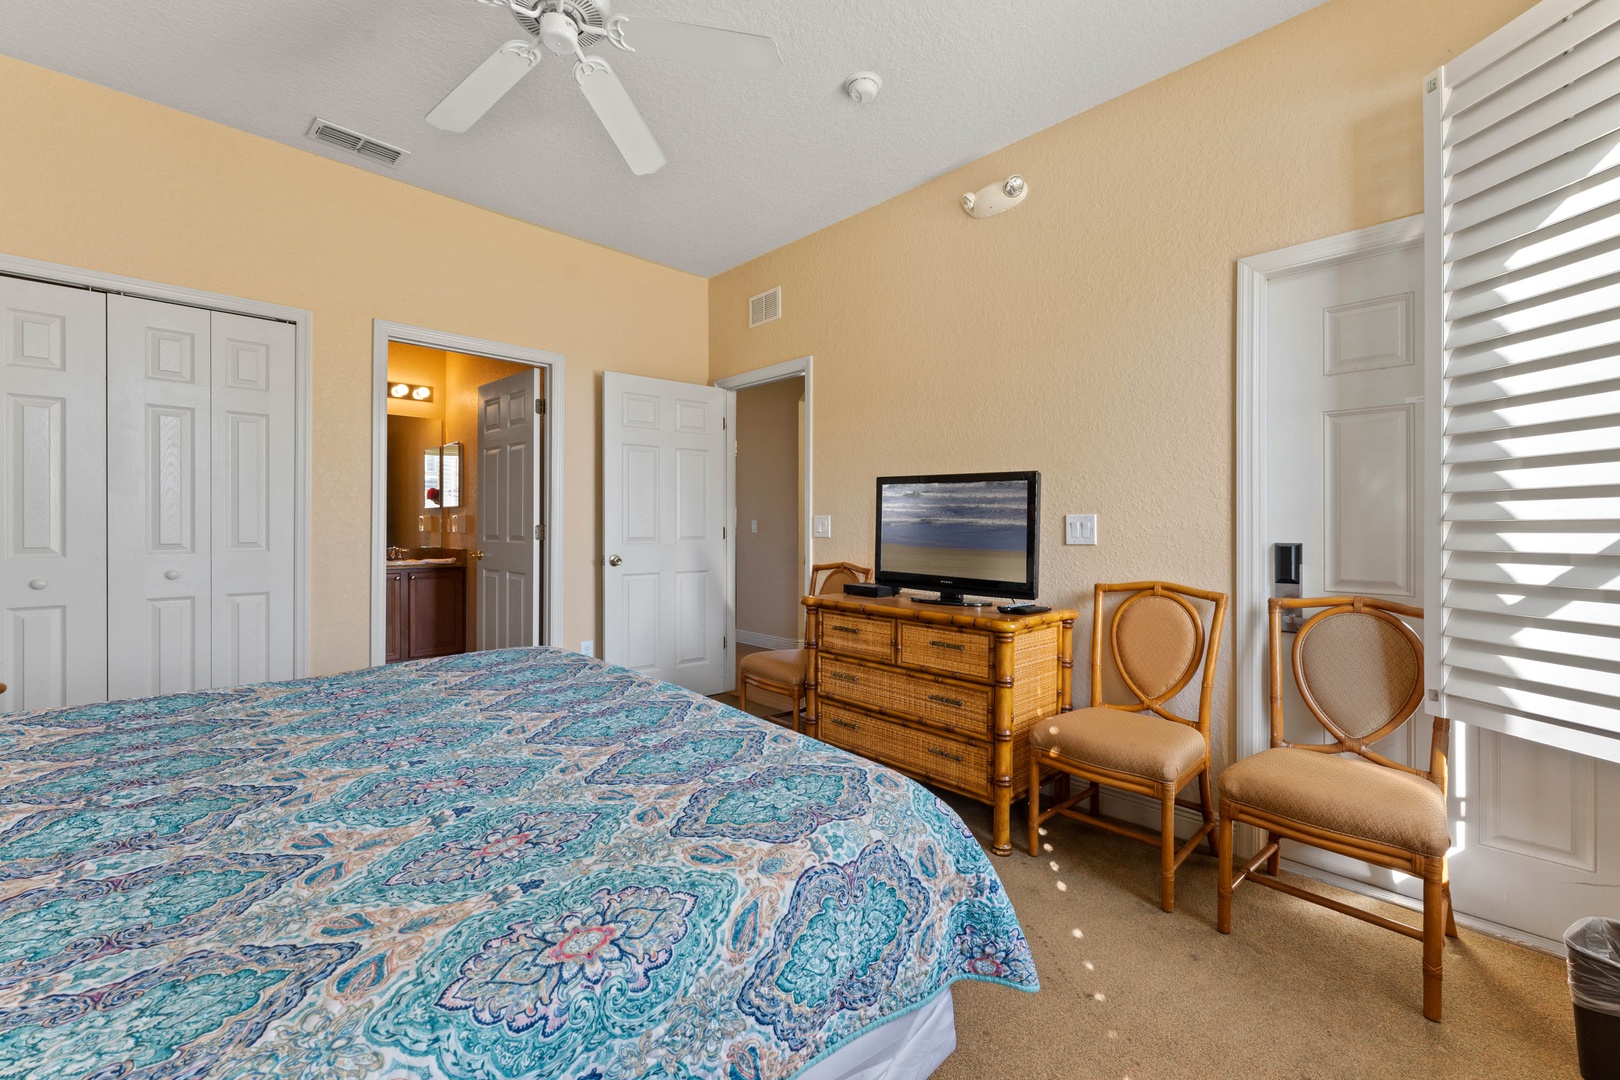 This 1st floor king suite offers a private ensuite, TV, & ceiling fan